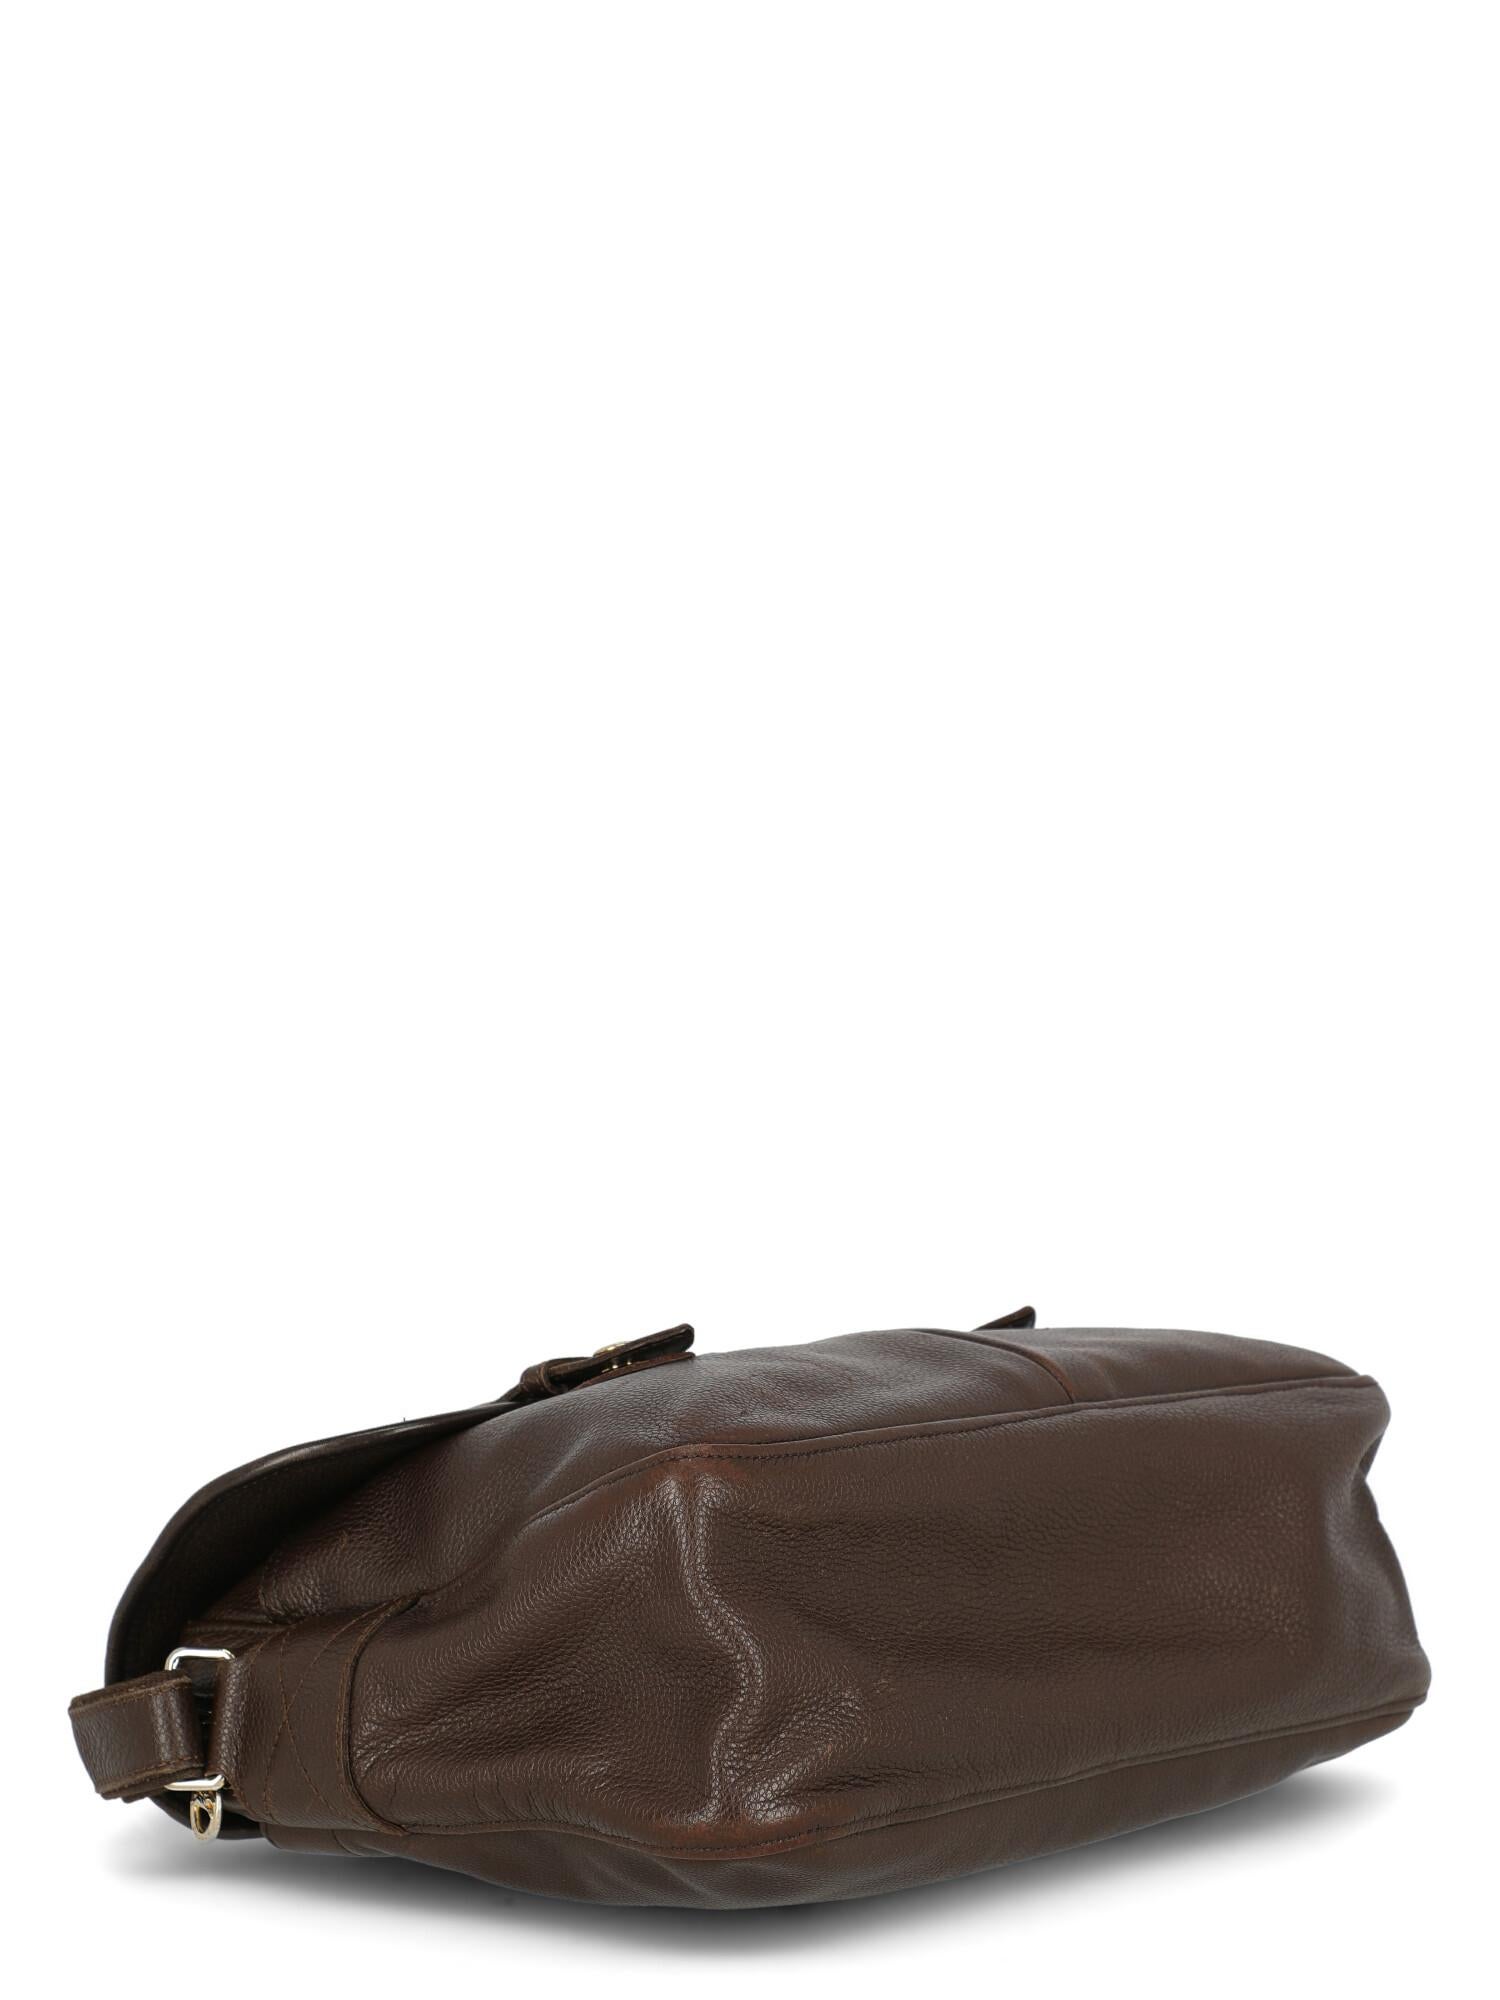 Longchamp Woman Shoulder bag  Brown Leather In Good Condition For Sale In Milan, IT